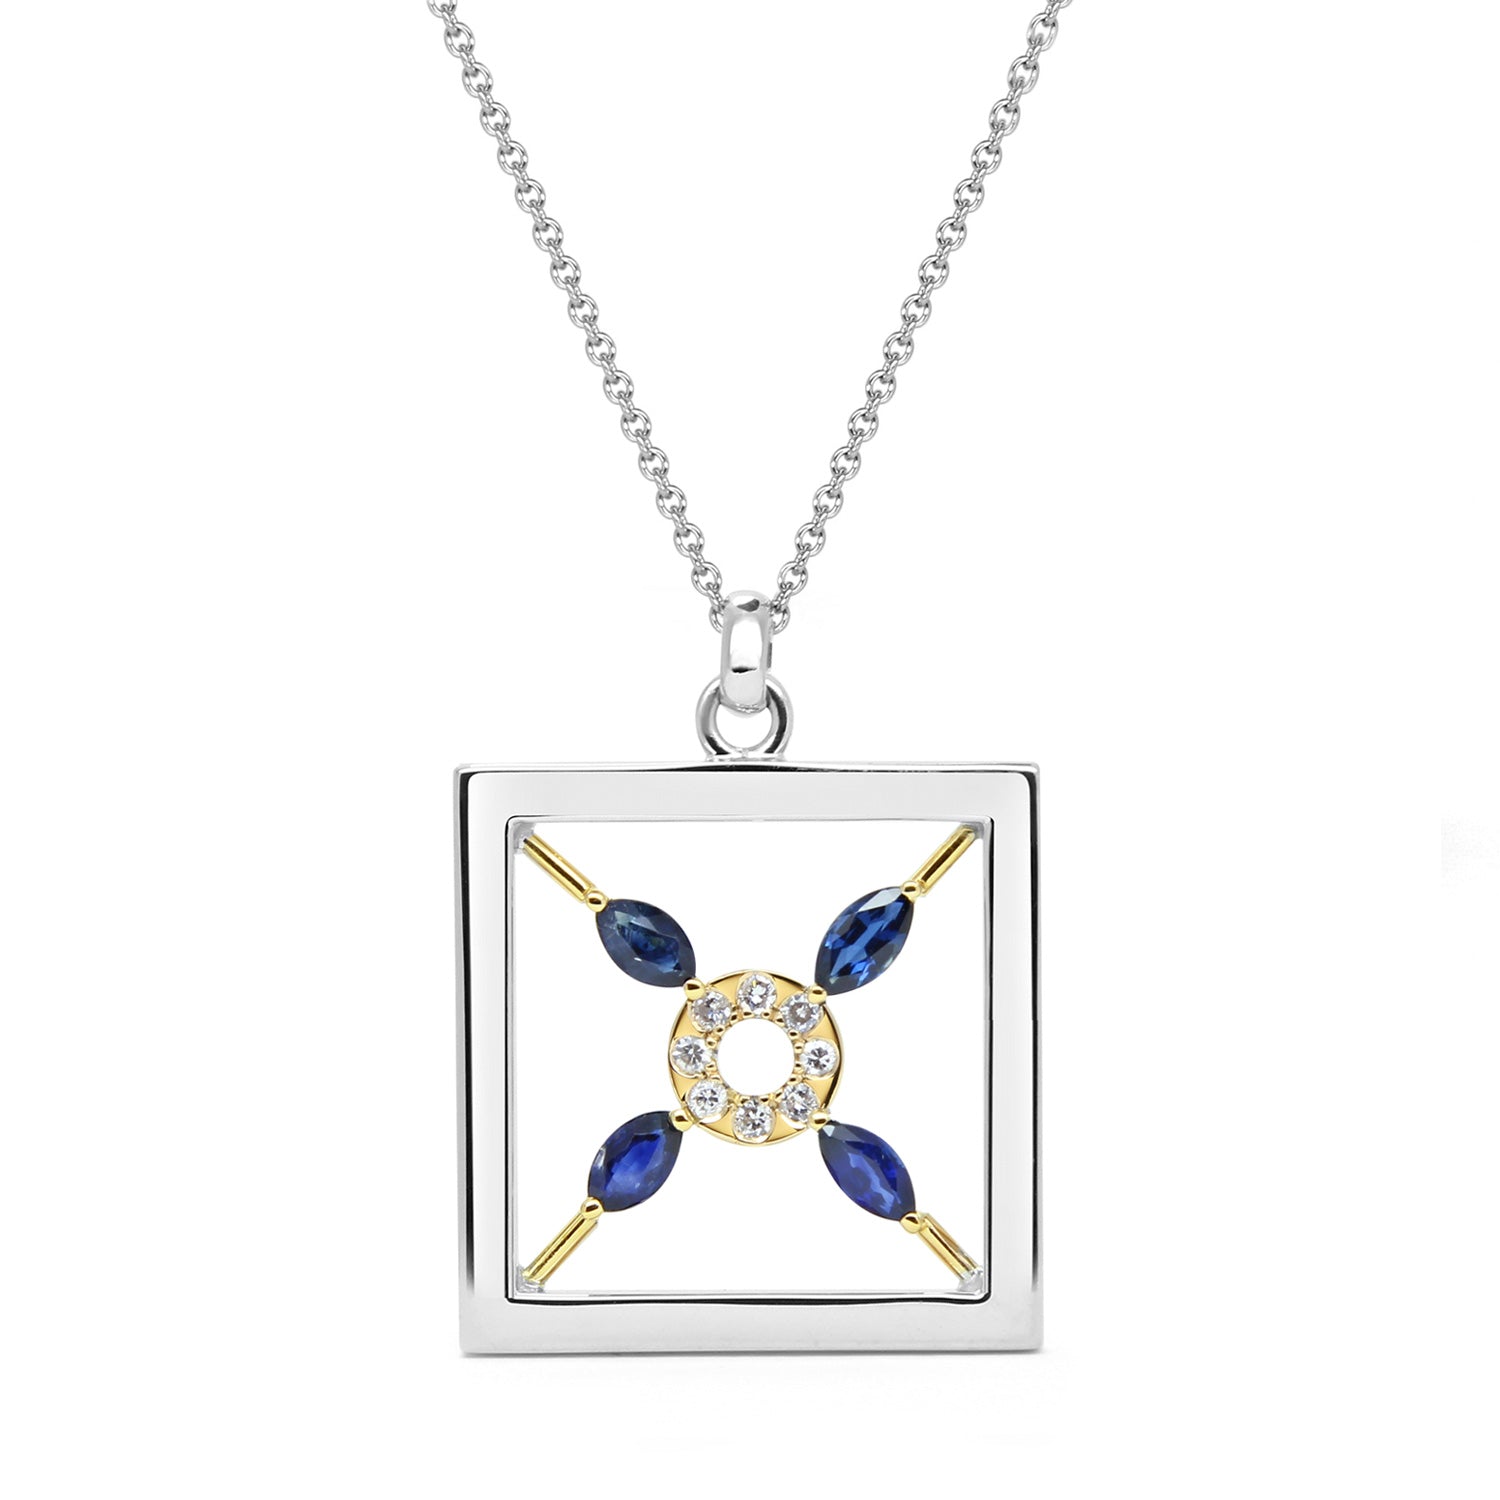 Bespoke pendant with ethical sapphires and recycled white gold